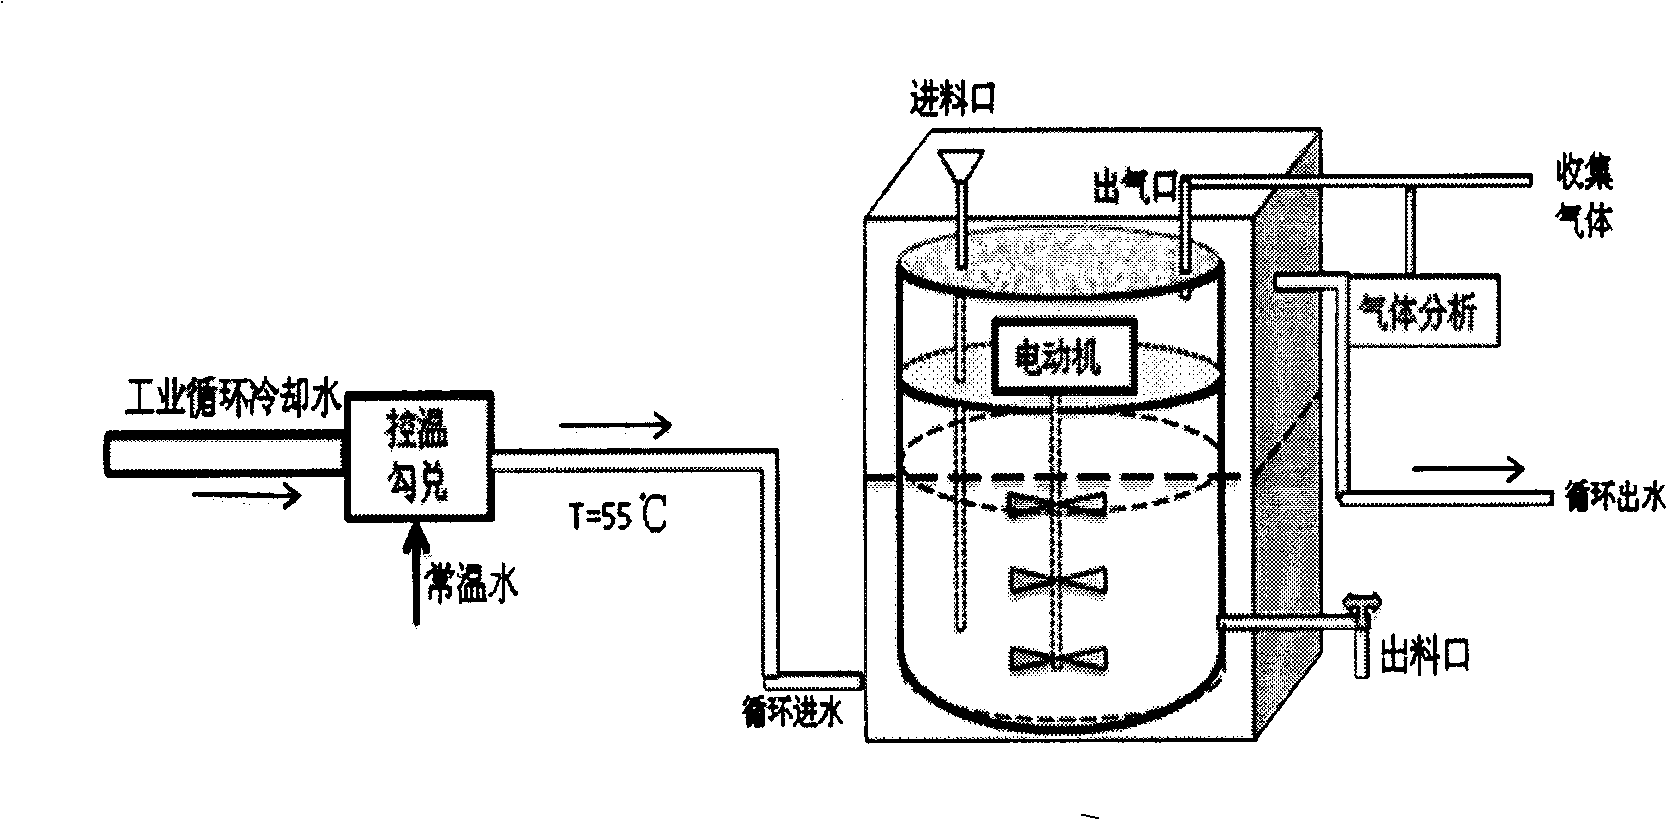 Anaerobic fermentation technical method of septic tank sediments by assist of industrial waste heat